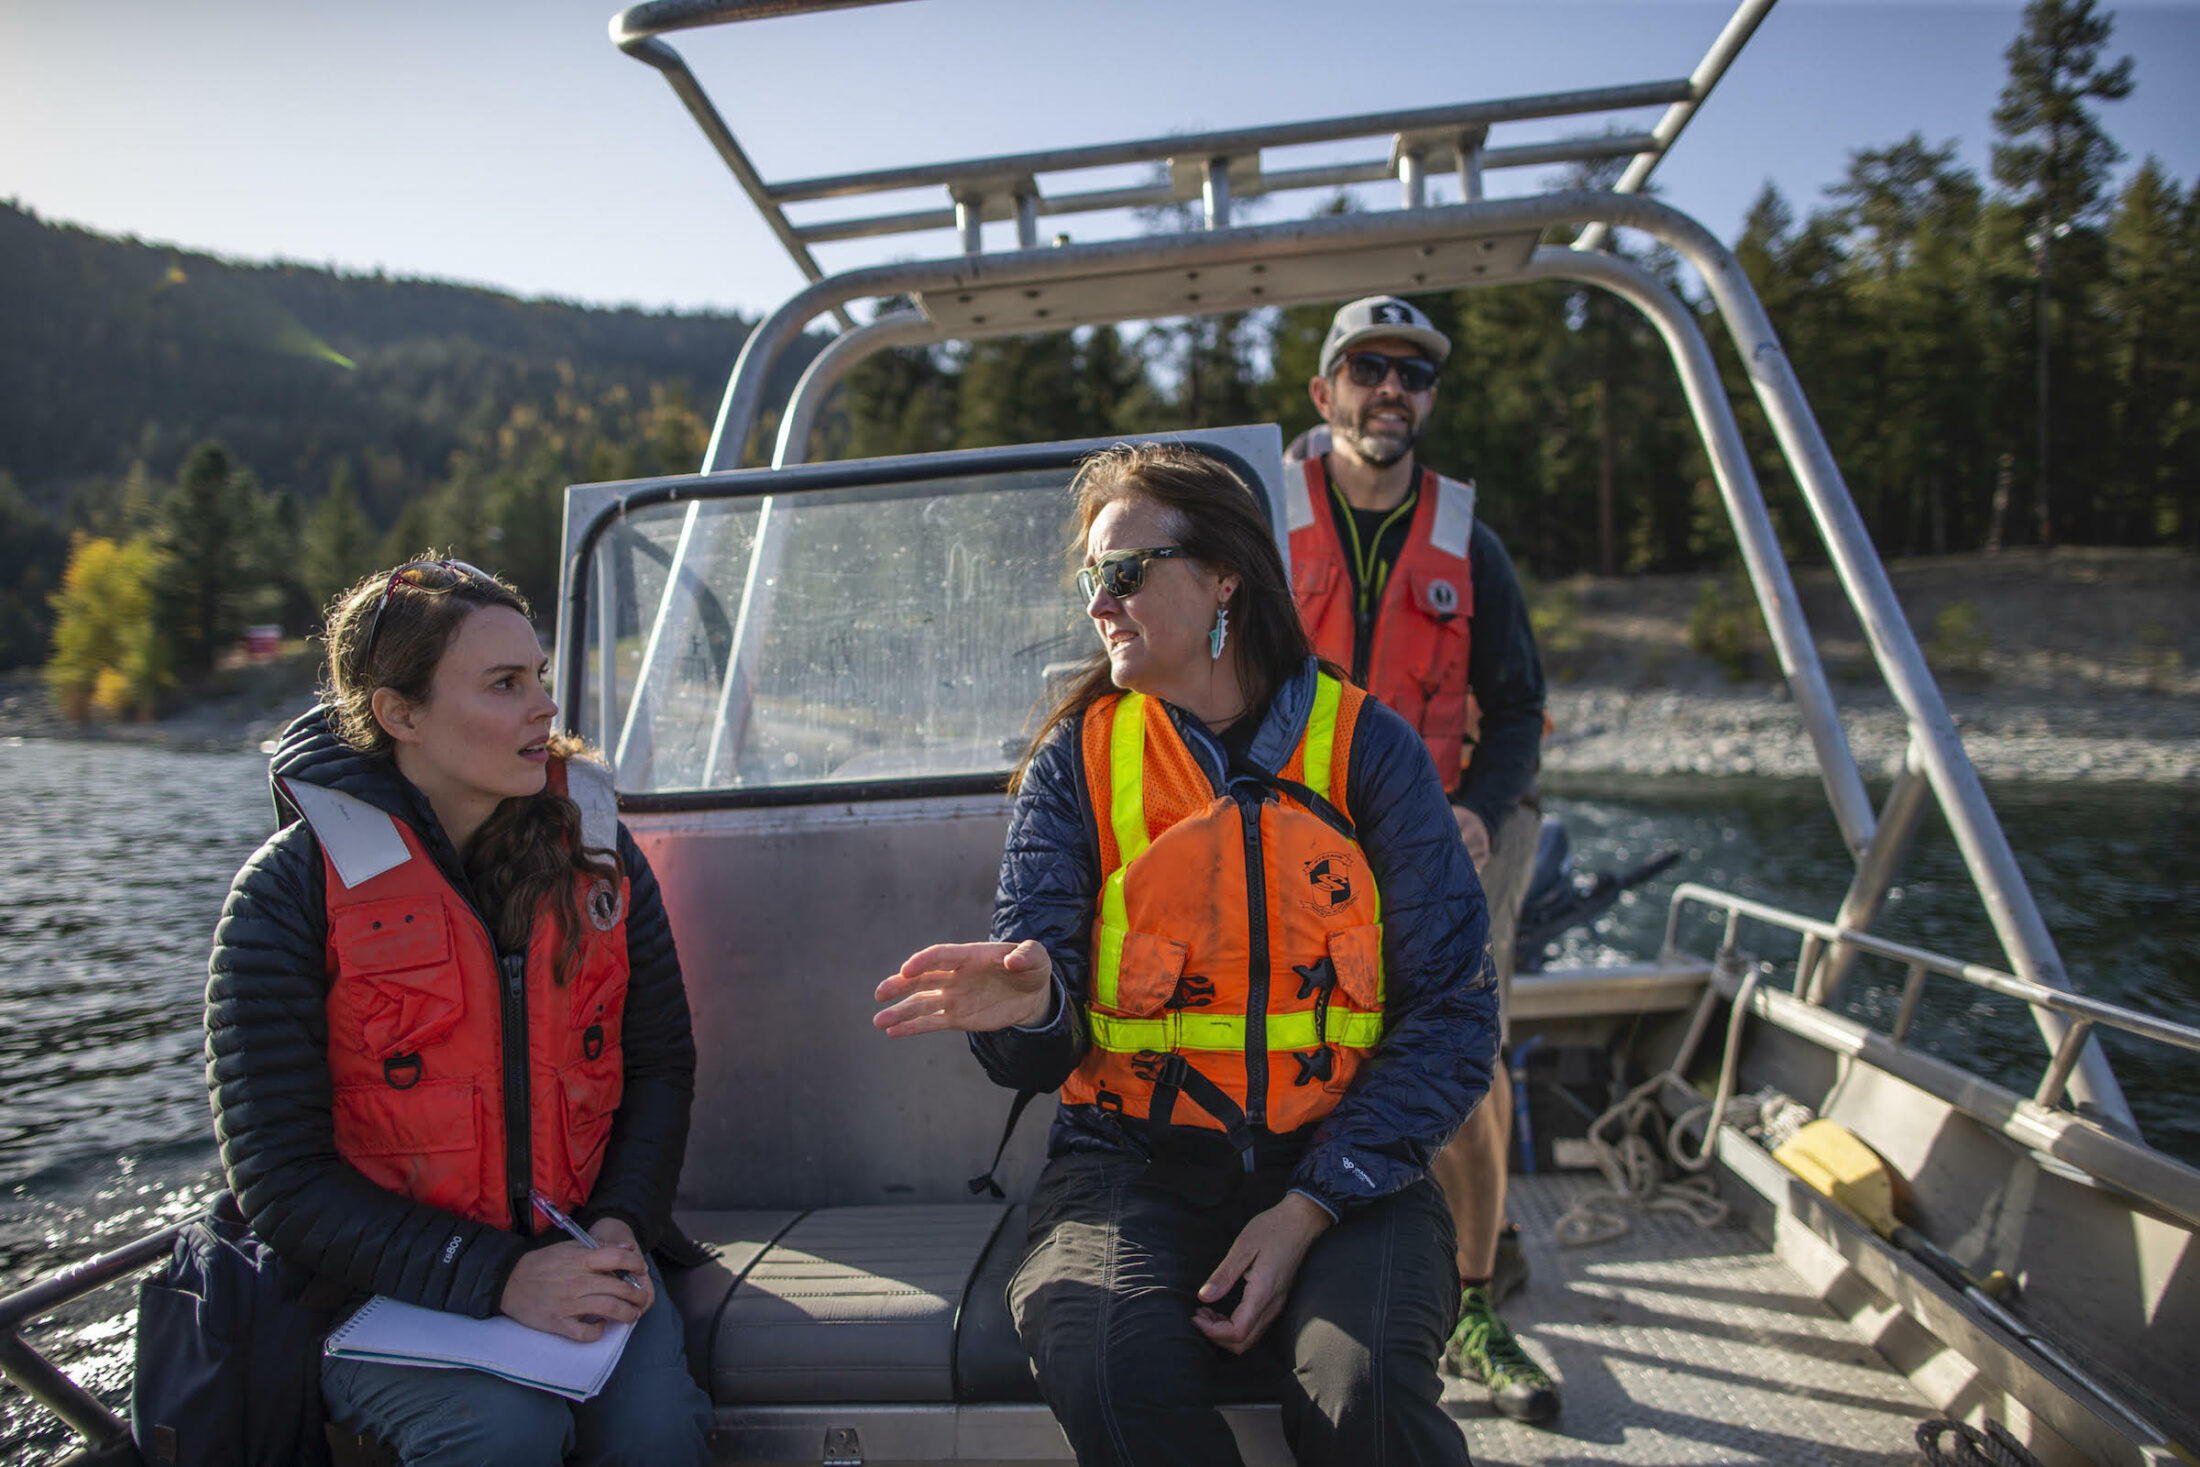 Reporter Ainslie Cruickshank speaking with Erin Sexton, a research scientist at the University of Montana's Flathead Lake Biological Station, on the Koocanusa Reservoir just above Libby Dam.